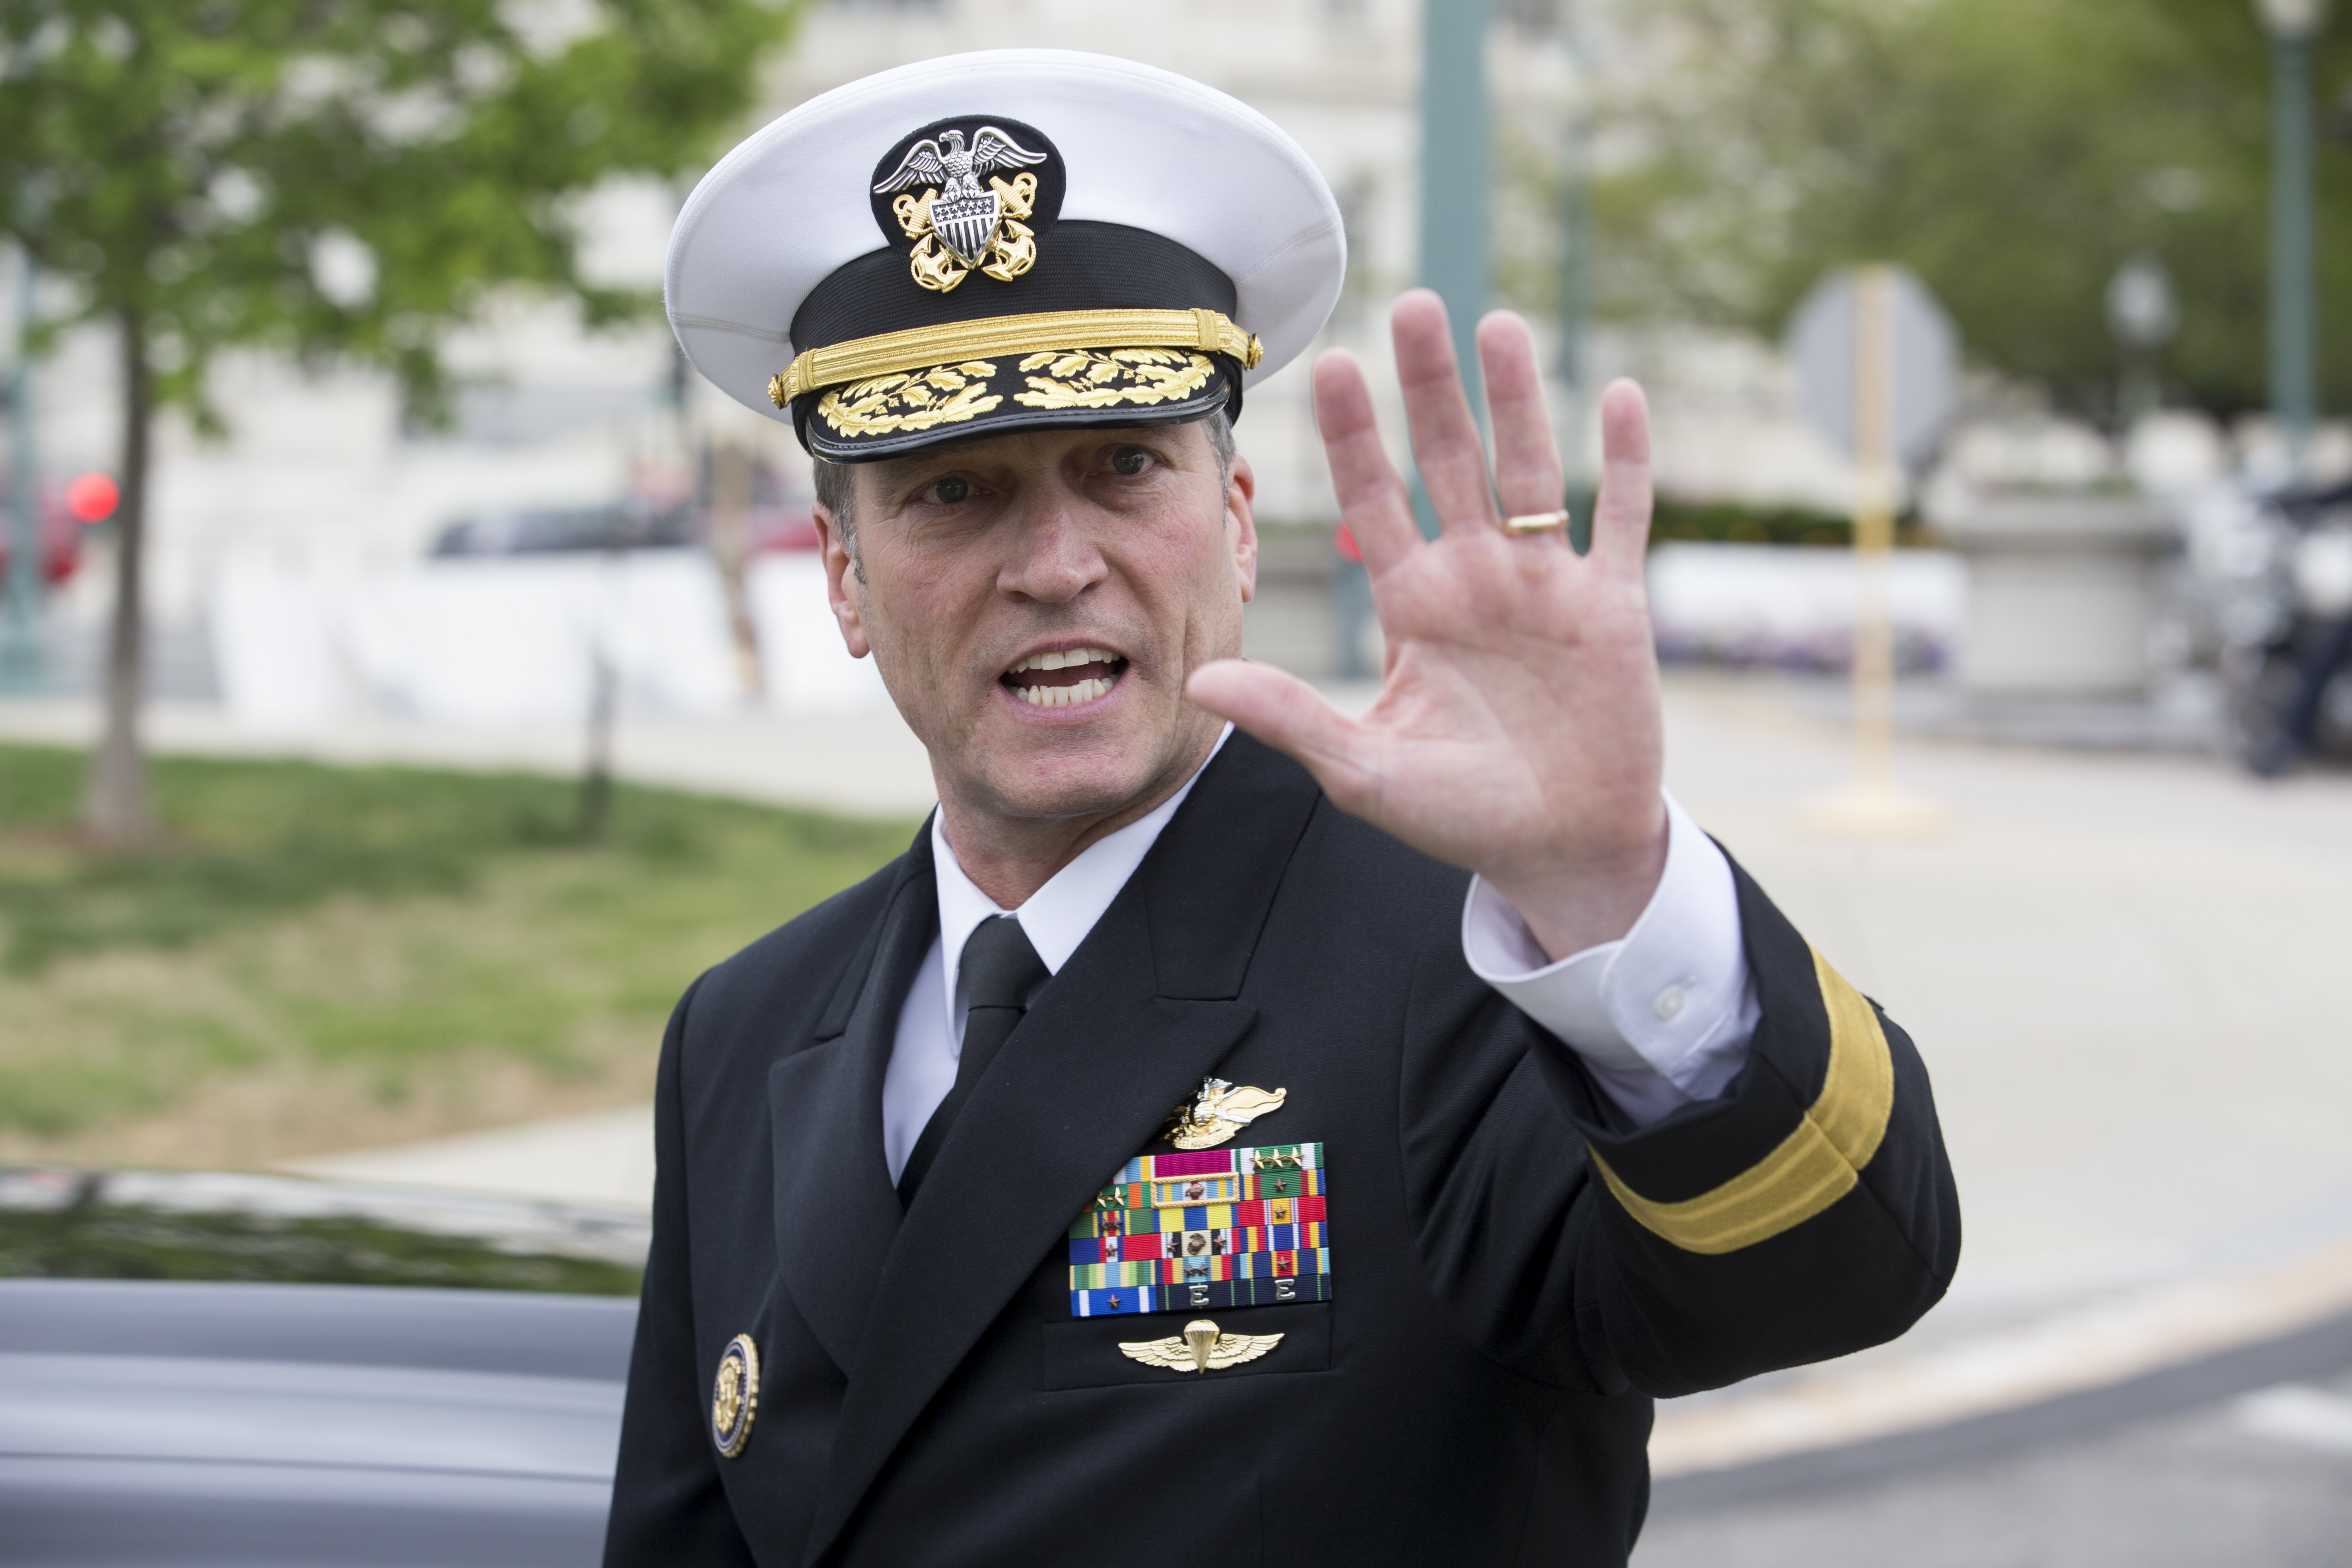 2018-04-24 12:17:37 epa06689825 US Navy Rear Admiral Ronny Jackson, US President Donald J. Trump's nominee to be Secretary of Veteran Affairs, waves to members of the news media following a meeting in the office of Republican Senator from Kansas Jerry Moran, on Capitol Hill in Washington, DC, USA, 24 April 2018. The Senate Veterans Affairs Committee has postponed Jackson's confirmation hearing amid allegations involving his behavior as a White House physician. If confirmed by the Senate, Jackson would fill the vacancy left by the exit of David Shulkin. EPA/MICHAEL REYNOLDS